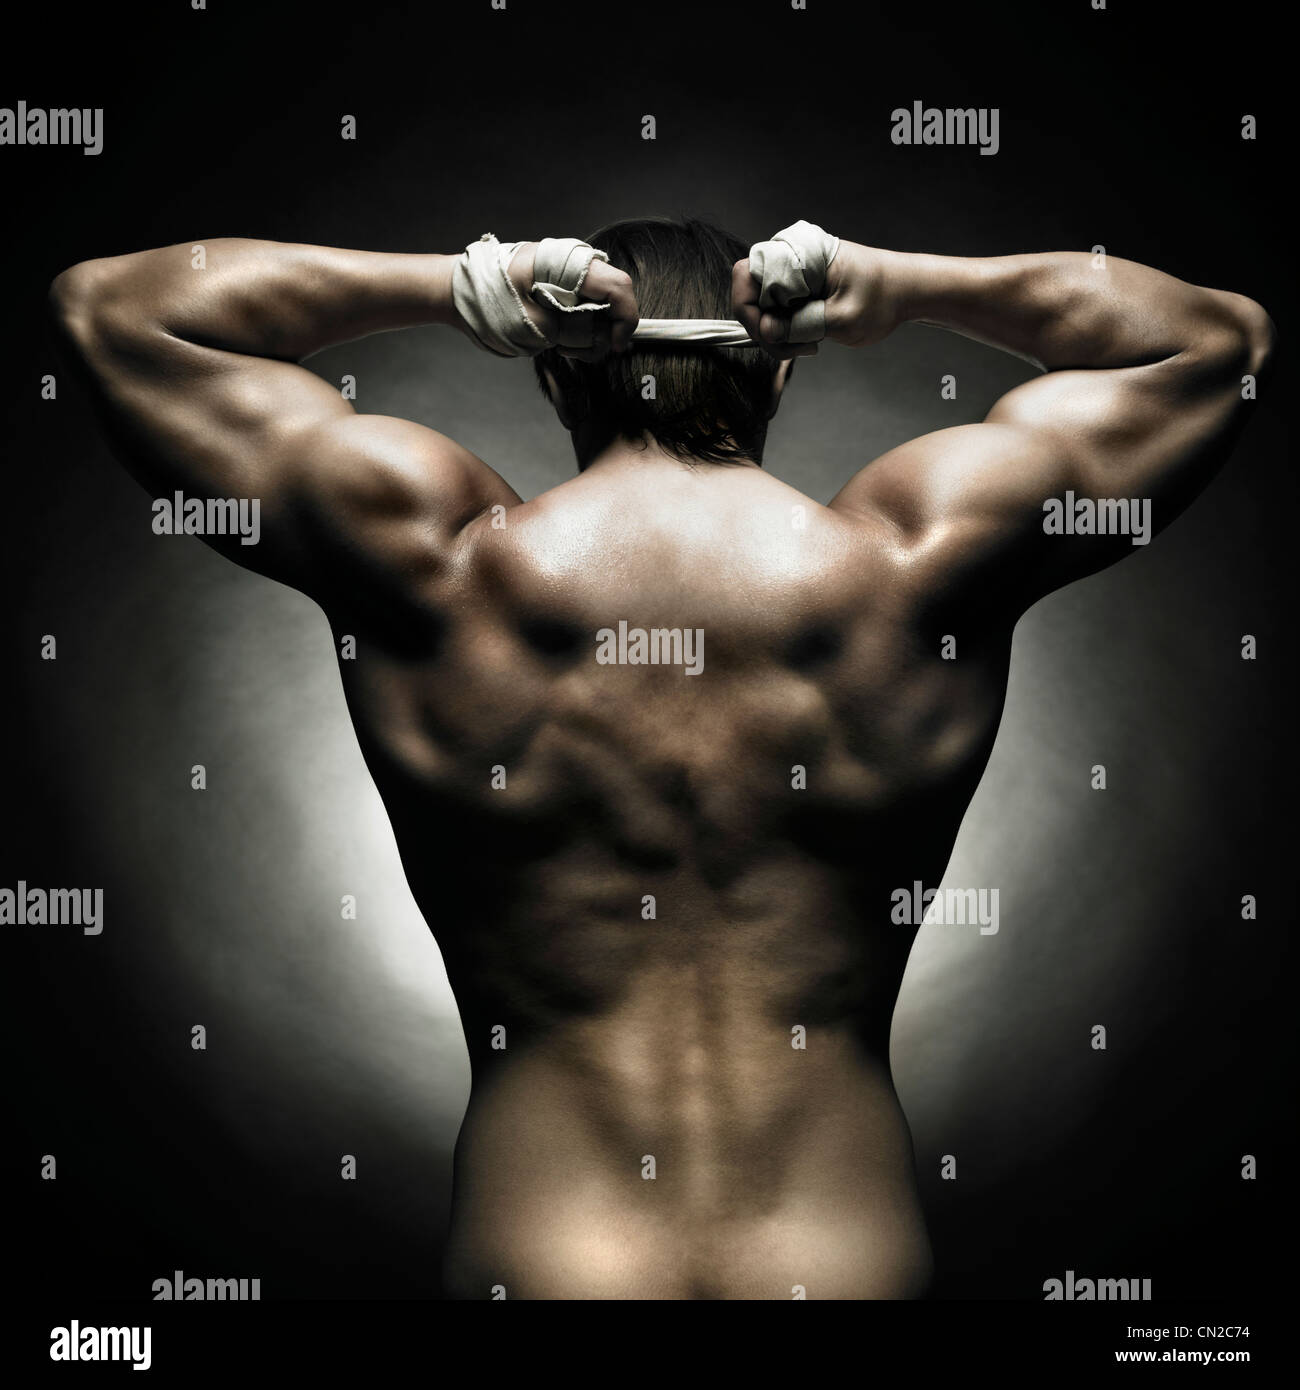 Naked athlete pics Portrait Of Bodybuilder Naked Athlete With Strong Body Nude Man Pose In Photographic Studio Stock Photo Alamy